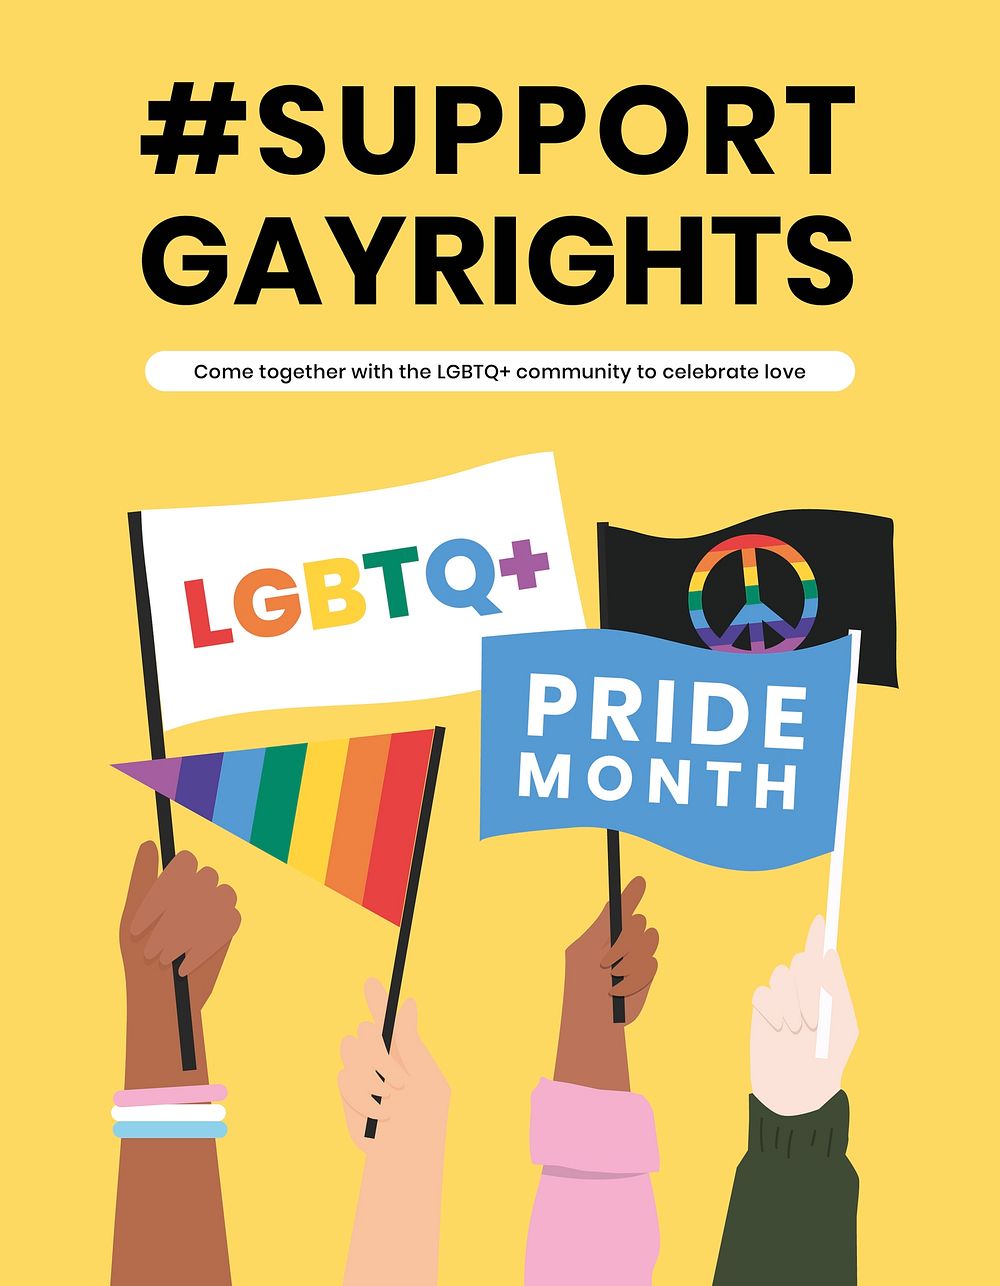 Support gay rights flyer template, LGBTQ, Pride Month campaign vector